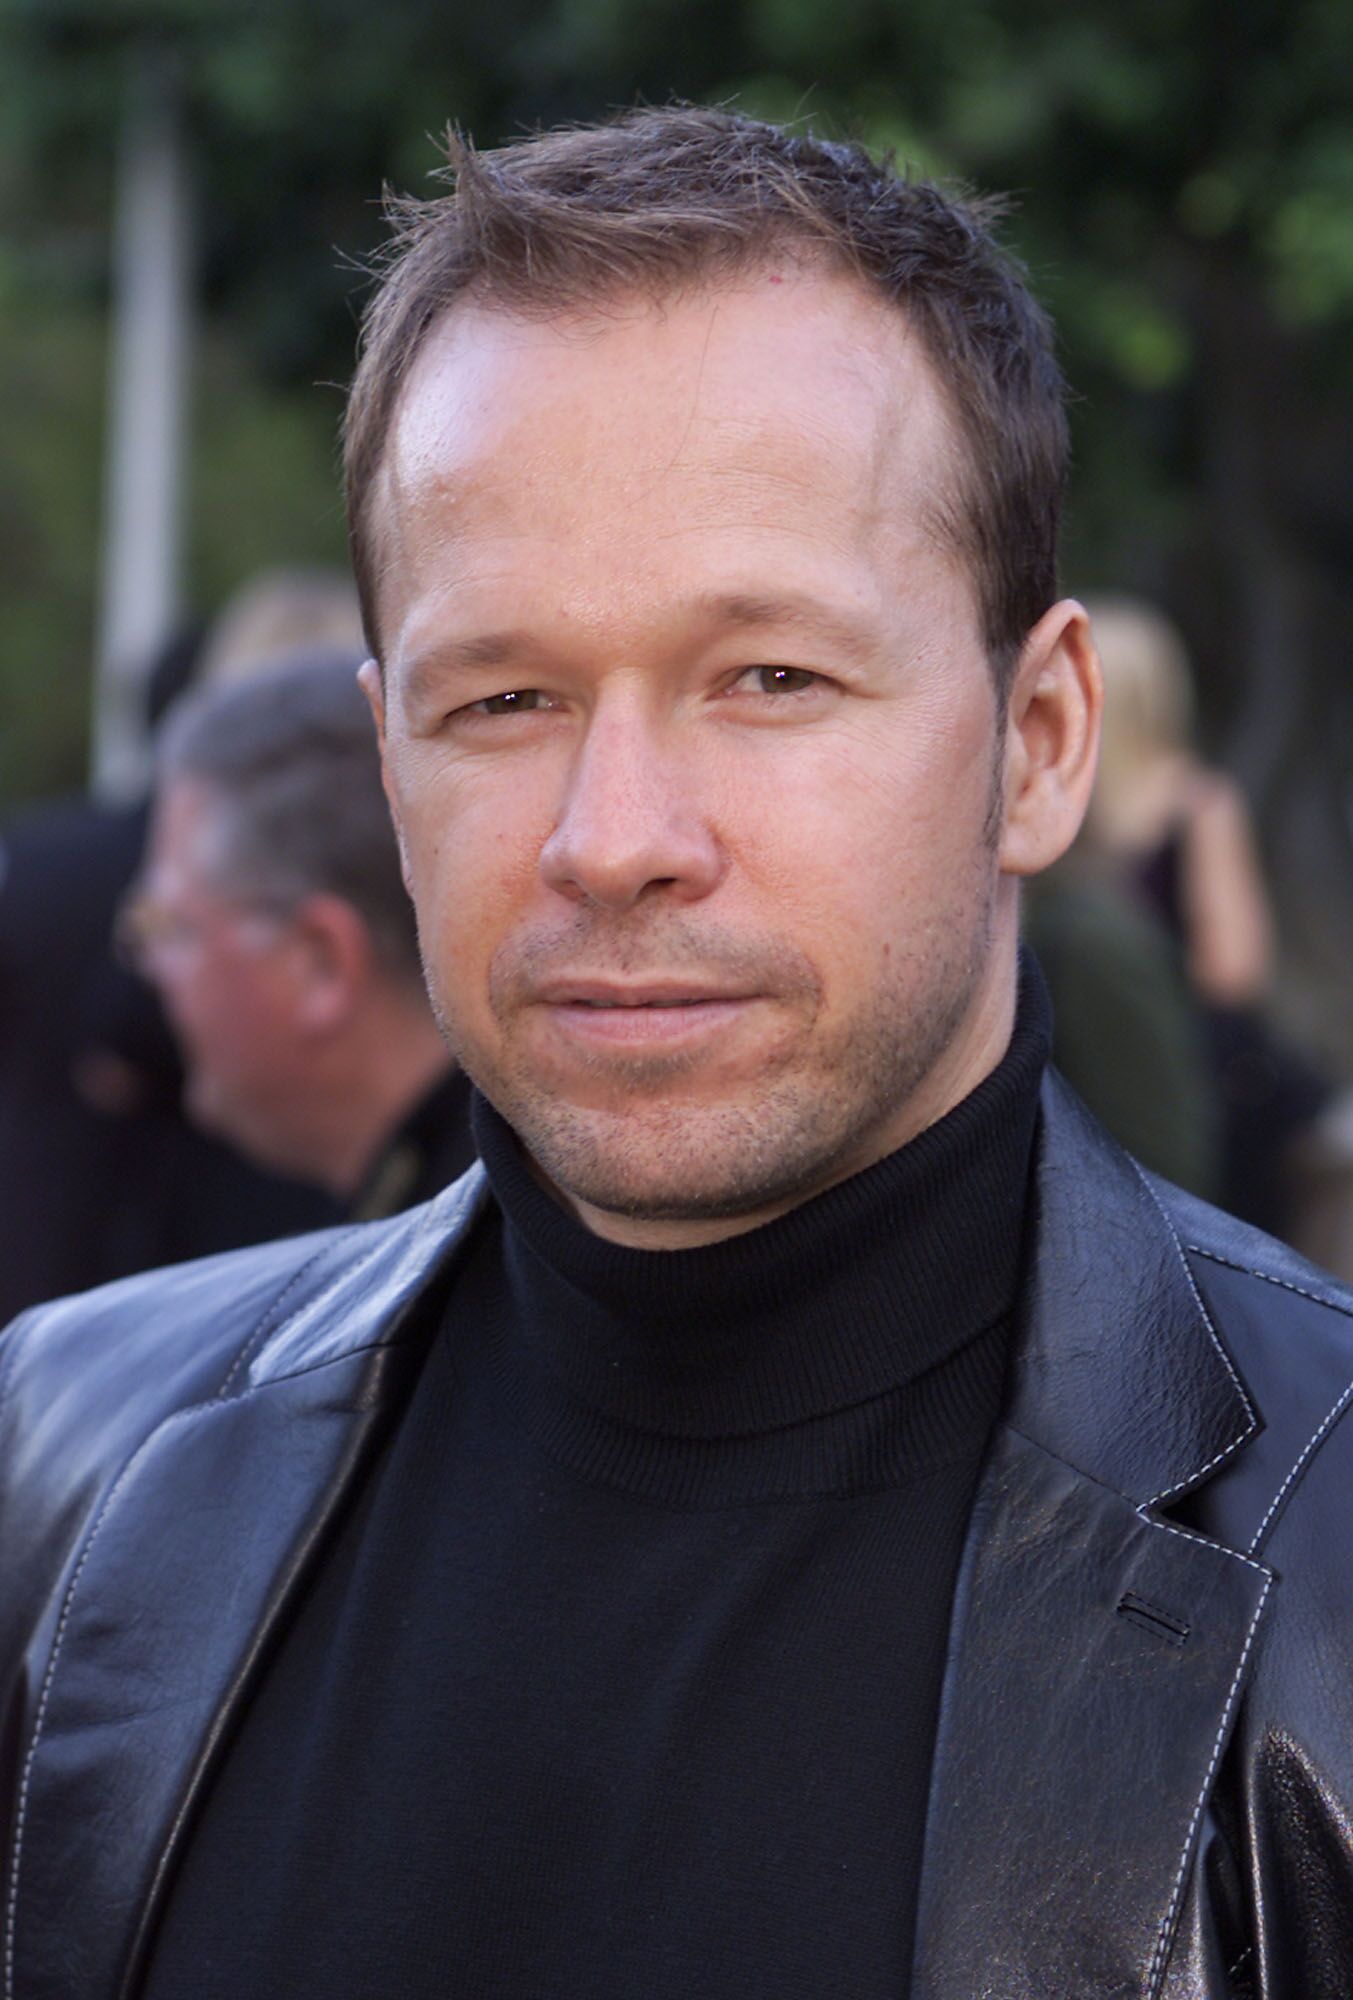 Donnie Wahlberg at the premiere of HBO's "Band of Brothers" at the Hollywood Bowl, Los Angeles | Getty Images